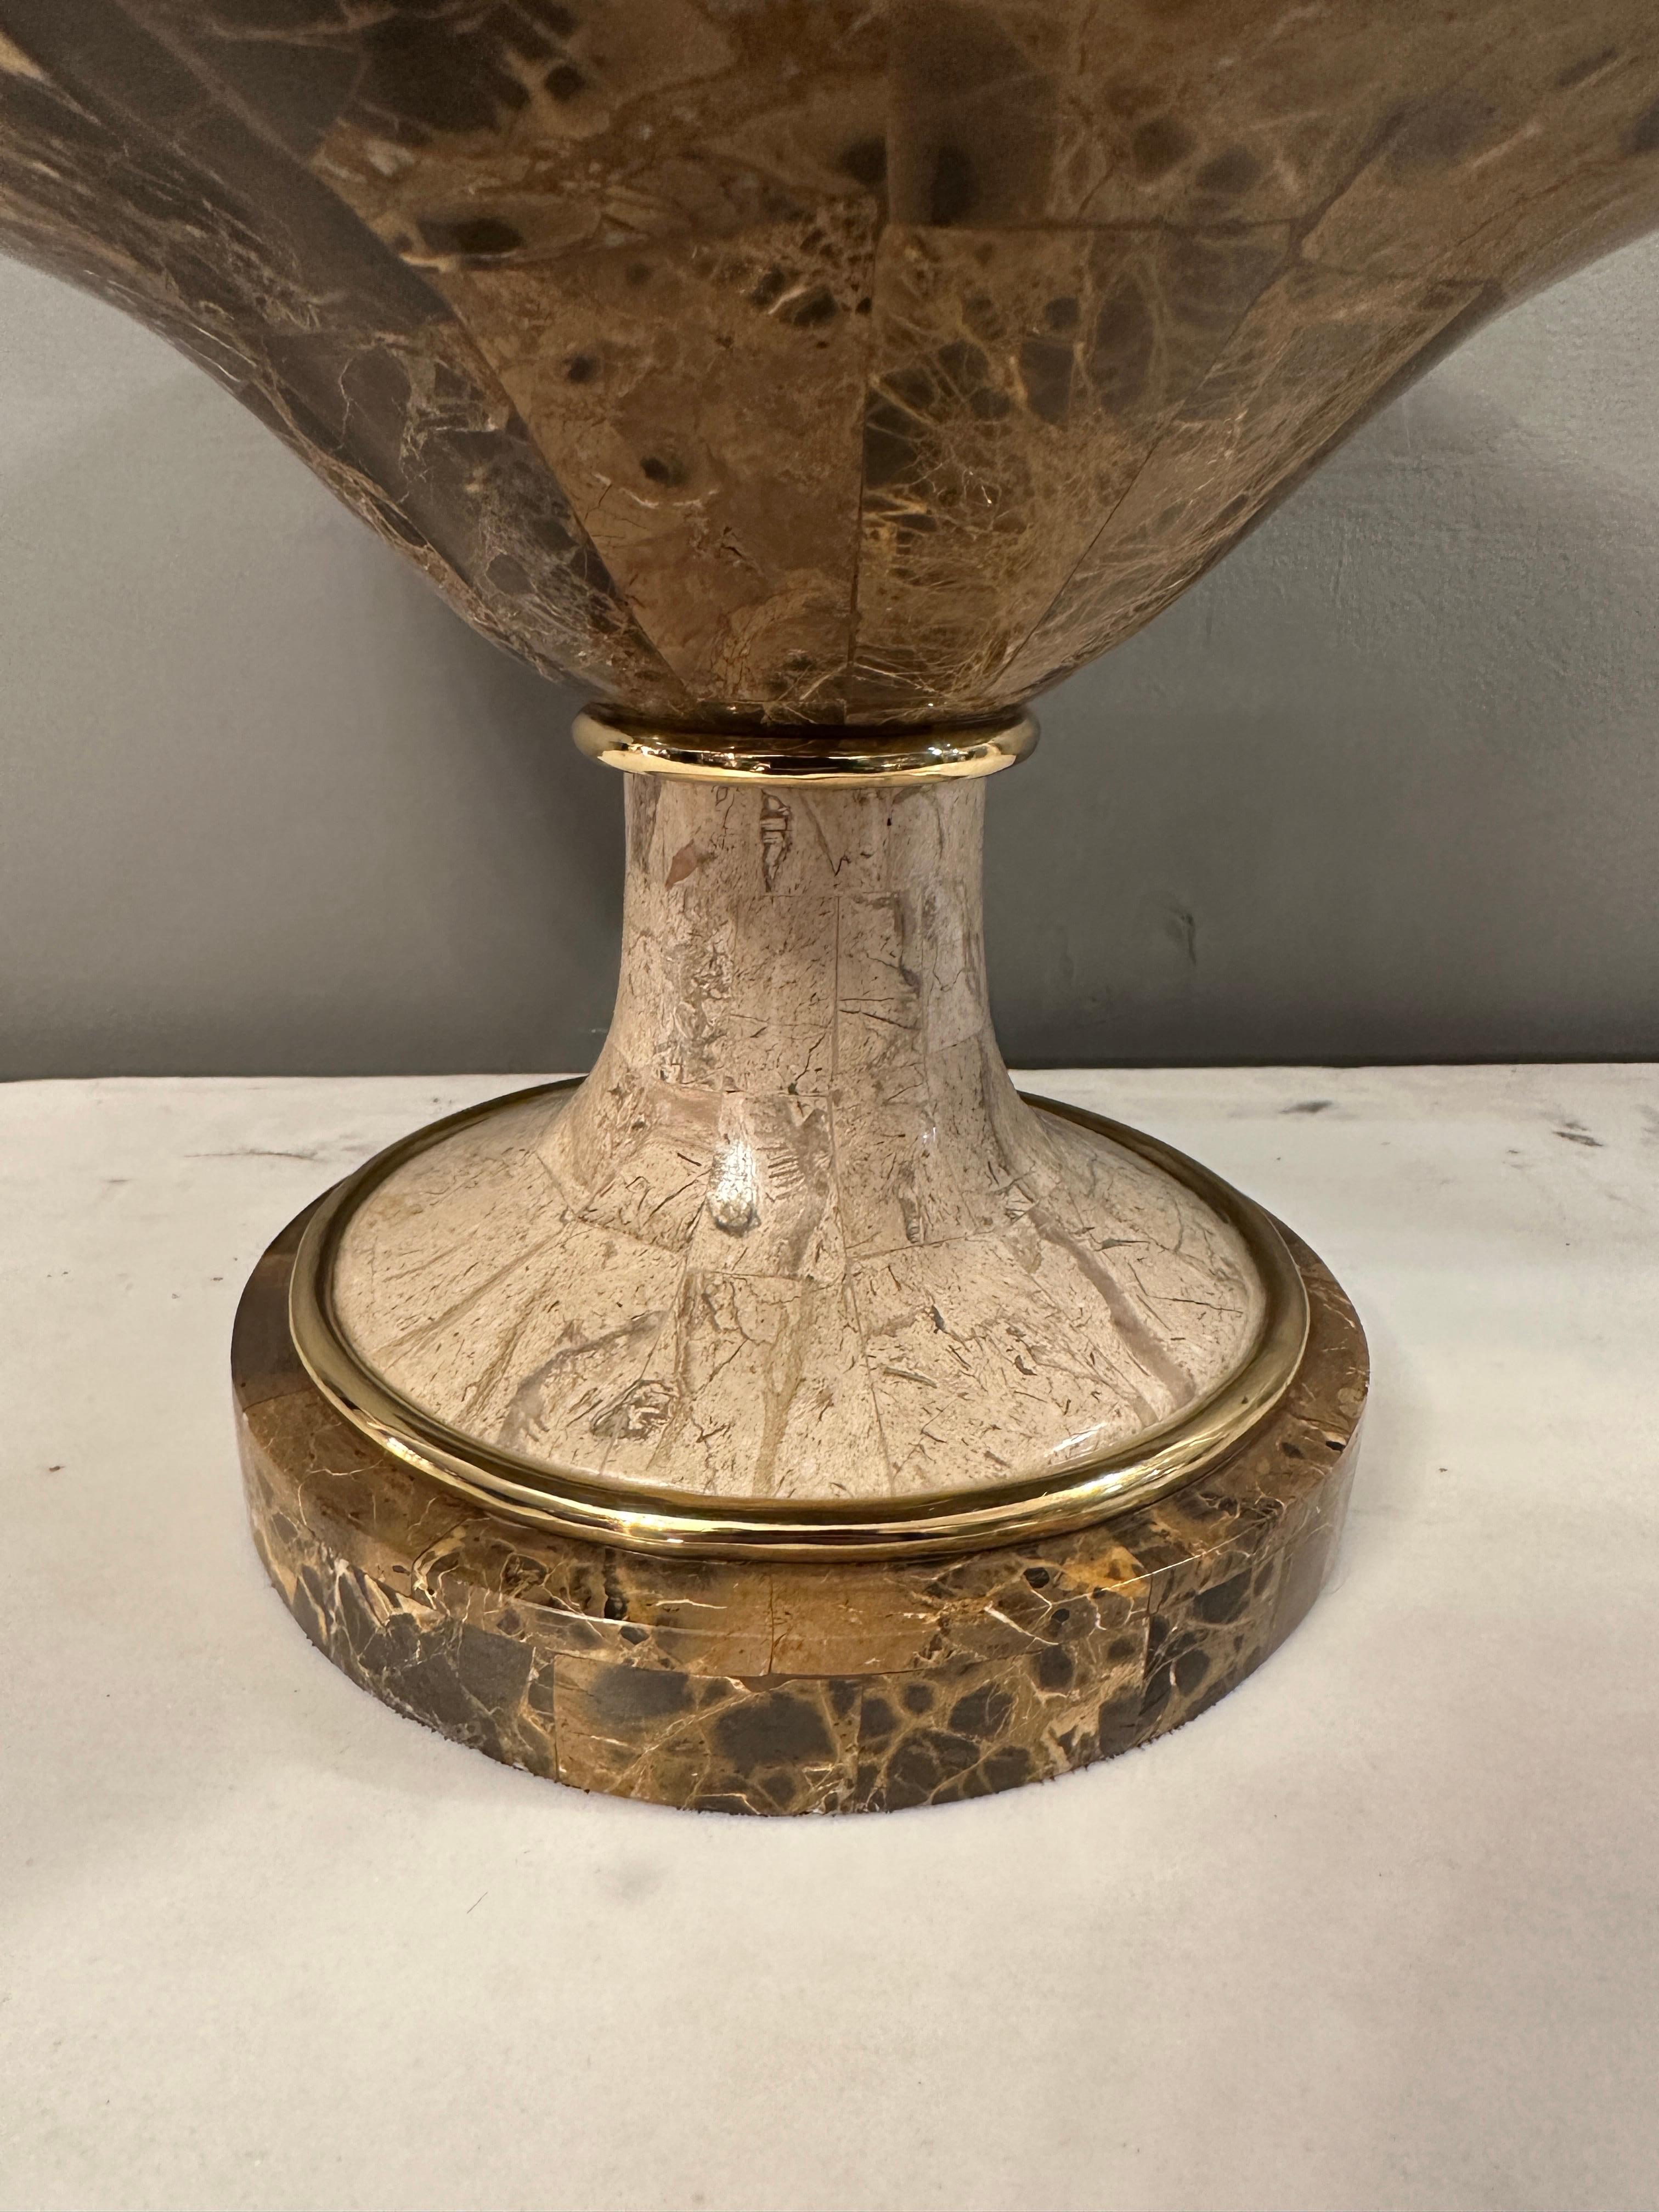 A Tessellated marble Tazza urn in Italian Emporador Marble. The undulating edge on the dish with brass banded soccle support.